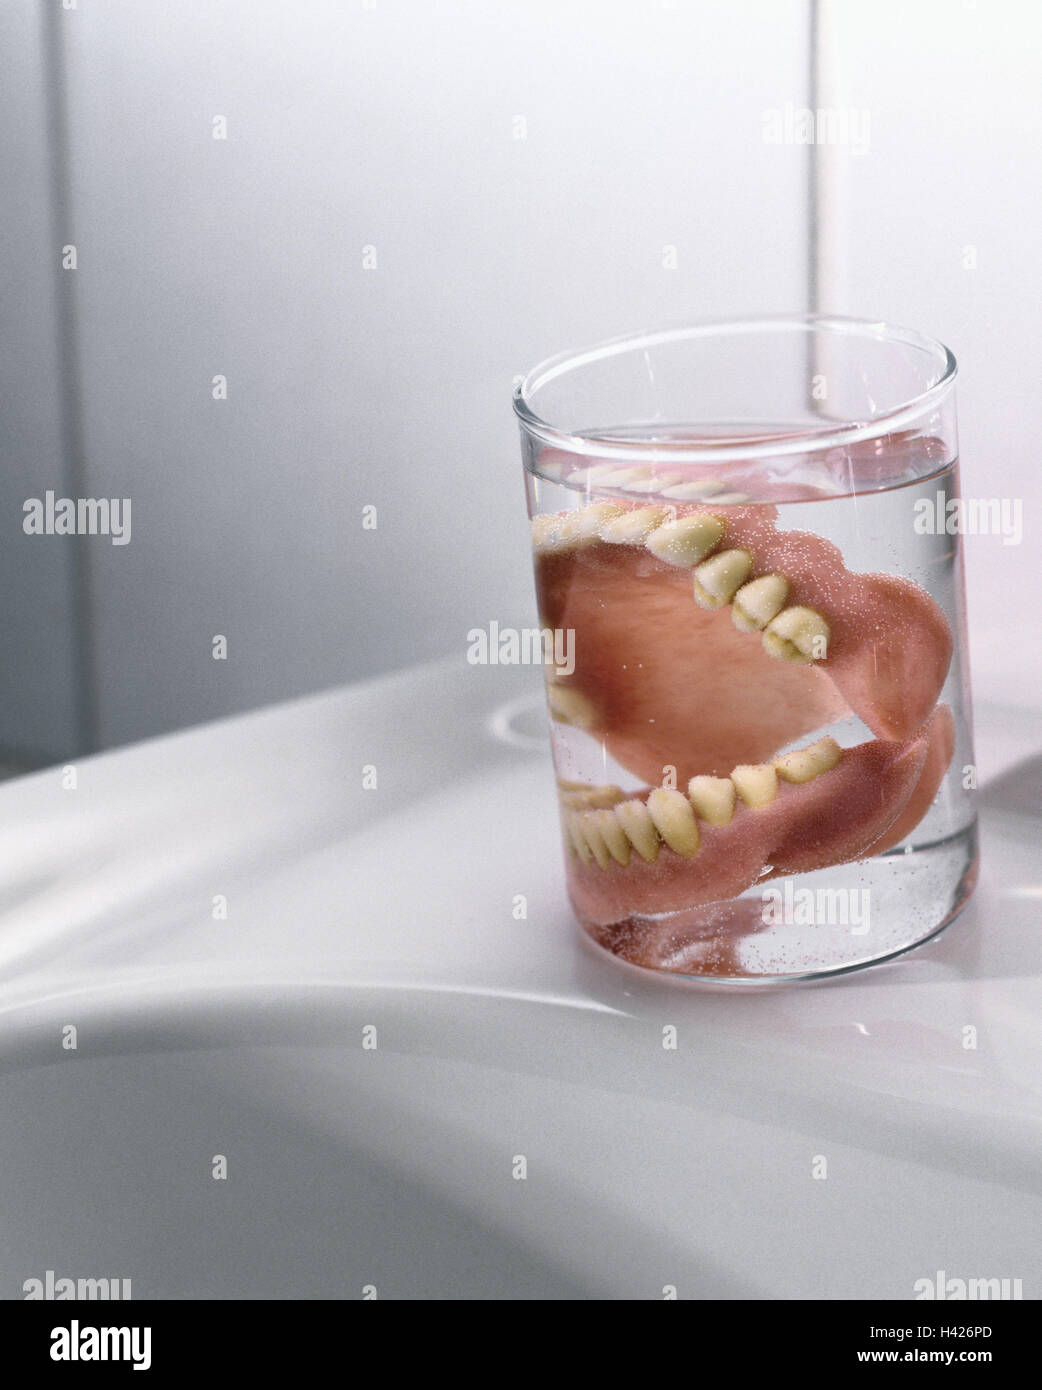 Sinks, water glass, dentures, Ti7, bath, washstand, set dentures, bite, cogs, artificially, plastic prosthesis, plastic prosthesises, denture, upper pine prosthesis, lower pine prosthesis, glass, water, cleaning, hygiene, conception, icon, old person, cog Stock Photo